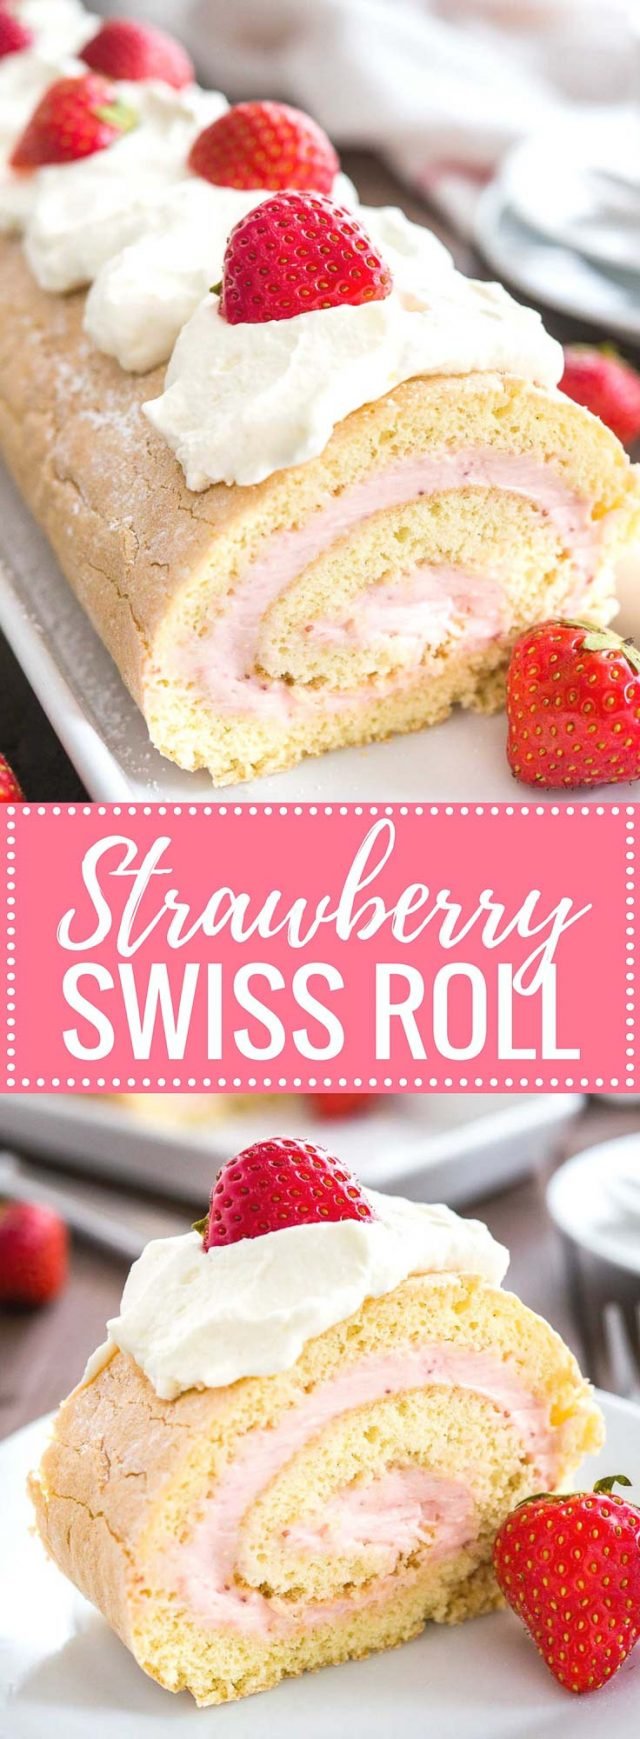 Strawberry Swiss Roll Cake Recipe | Plated Cravings